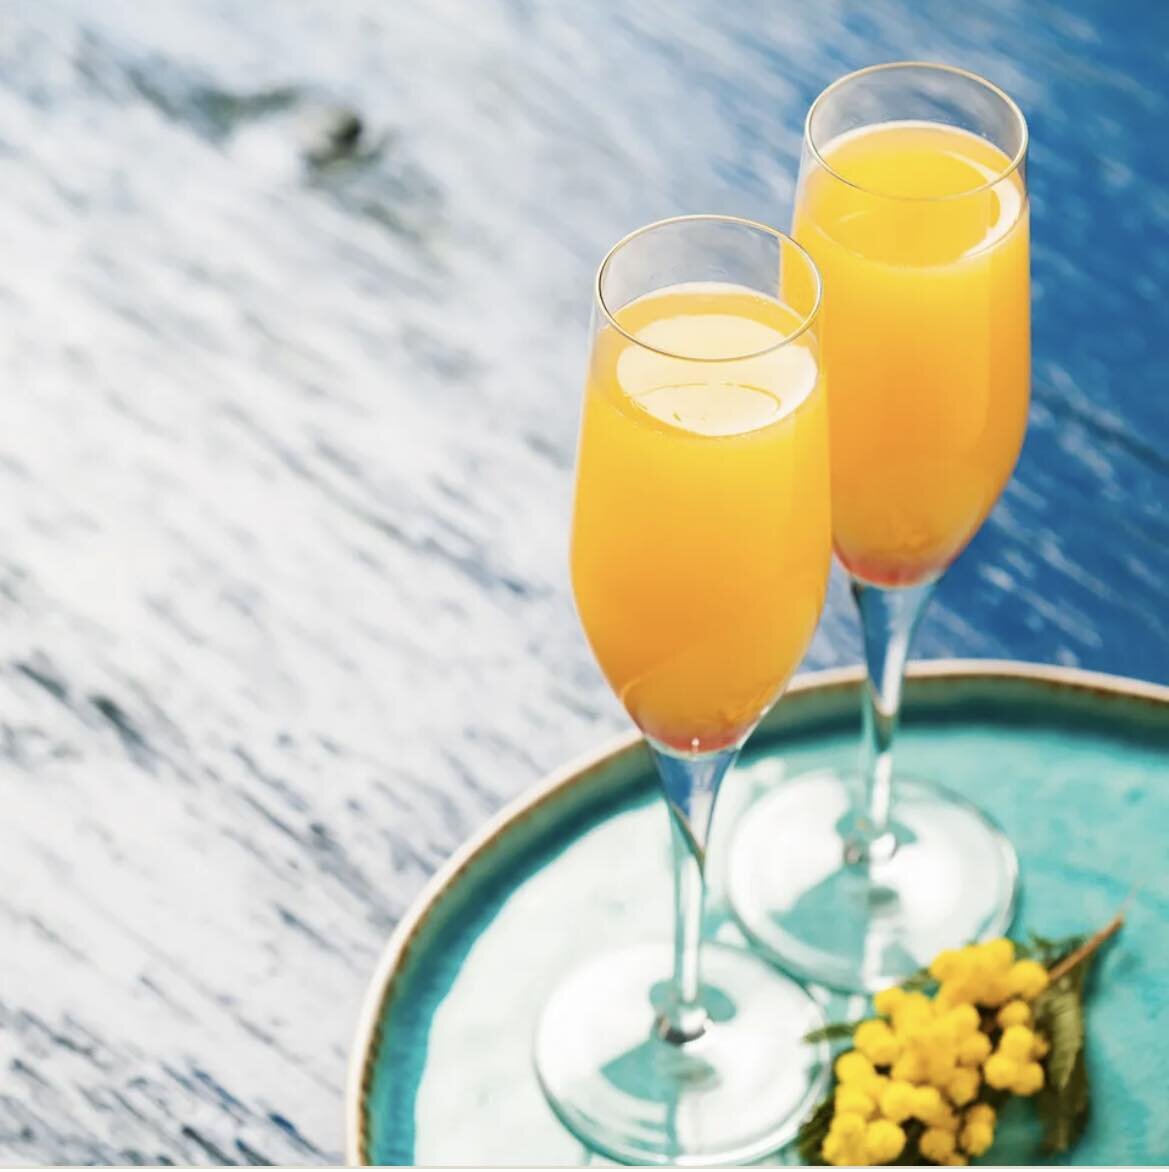 Mimosas anyone? What better way to start your Saturday than by joining the Binnekill crew starting at noon today! New drink specials available from 12-4, featuring mimosas, bellinis and more! We hope to see you soon! #greatwesterncatskills #catskills